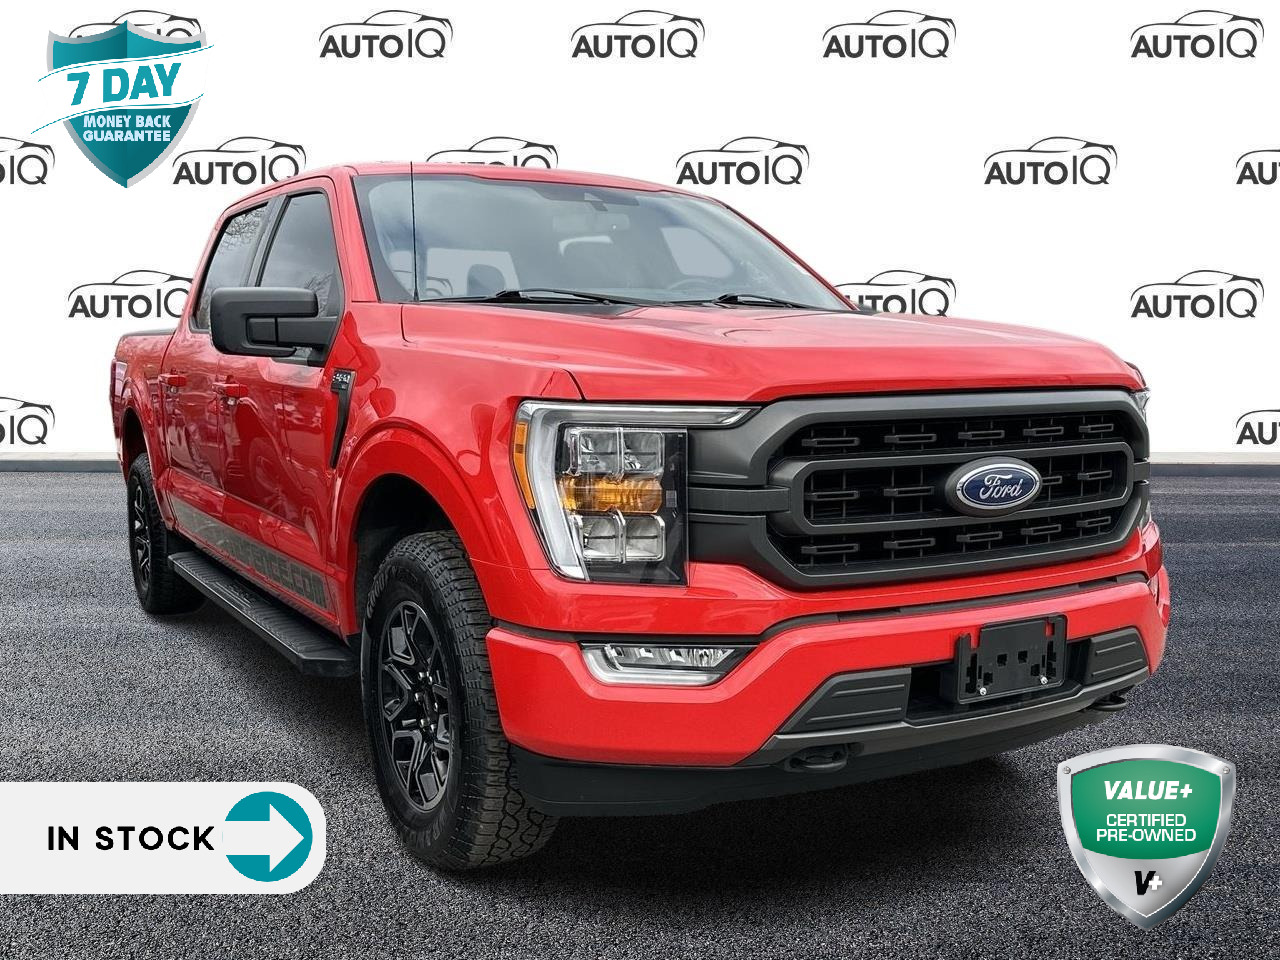 2021 Ford F-150 XLT XLT SERIES | TRAILER TOW PACKAGE | ILLUMINATED